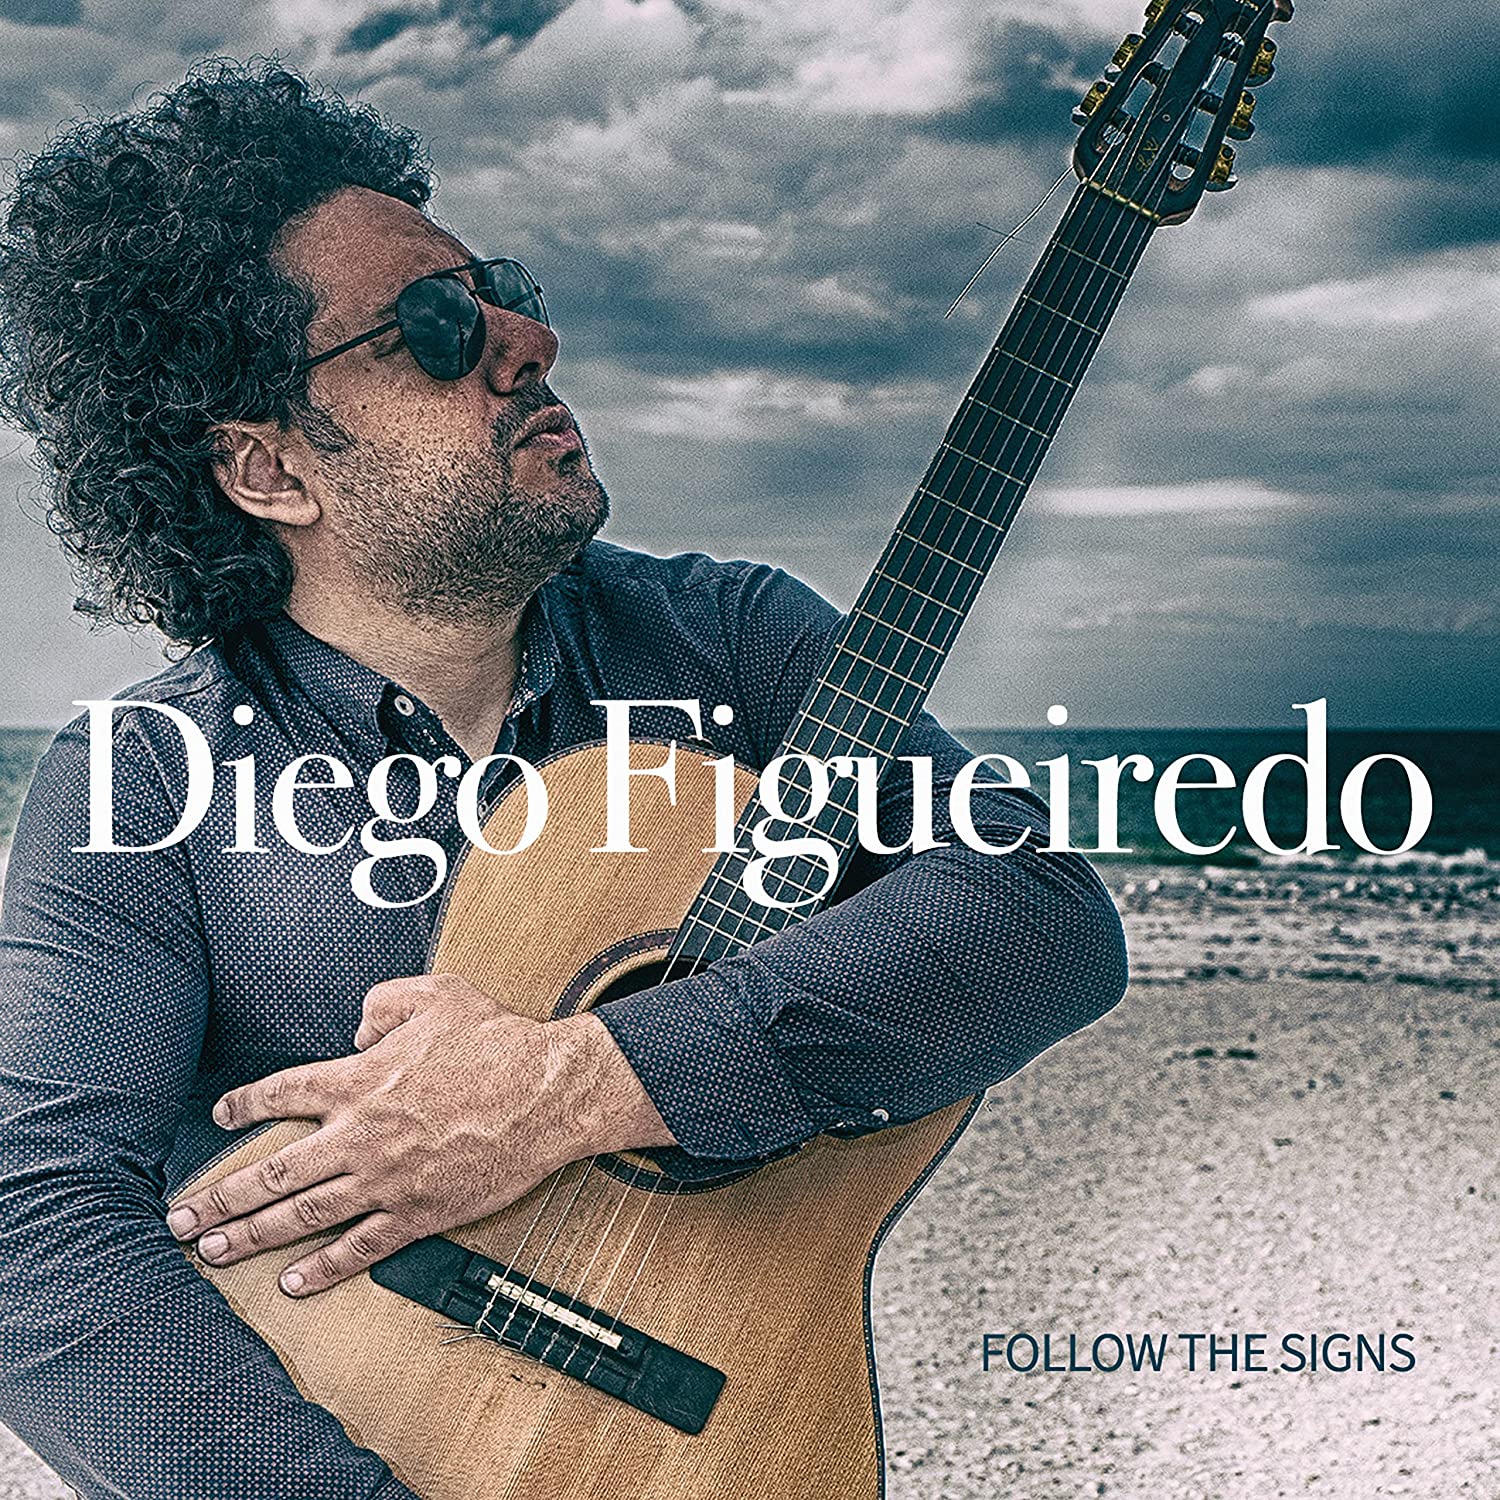 DIEGO FIGUEIREDO - Follow The Signs cover 